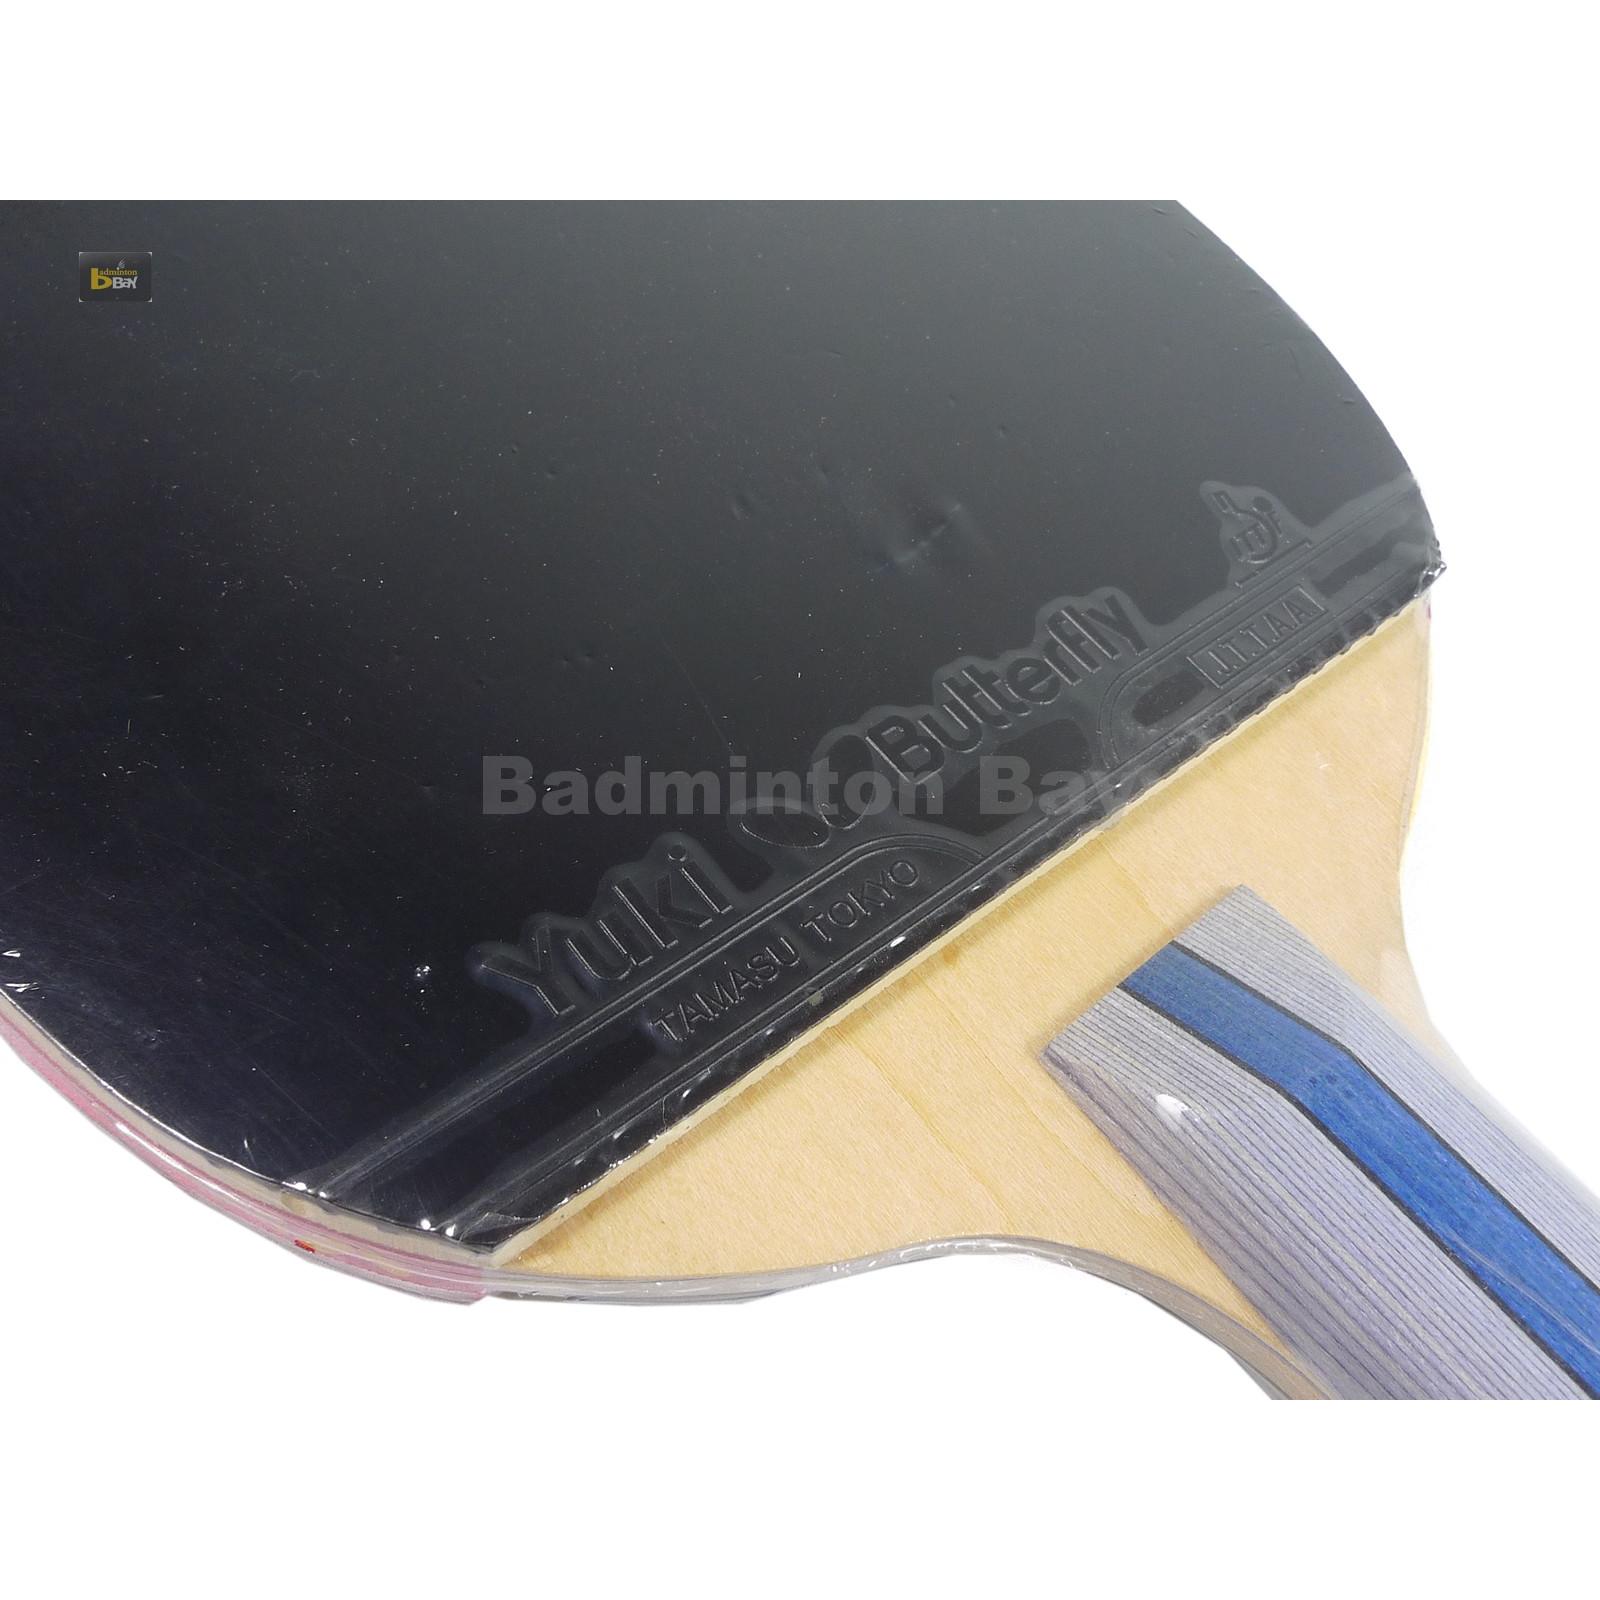 Butterfly Table Tennis Bat New, TBC-402 TBC402 Paddle Racket with Case 